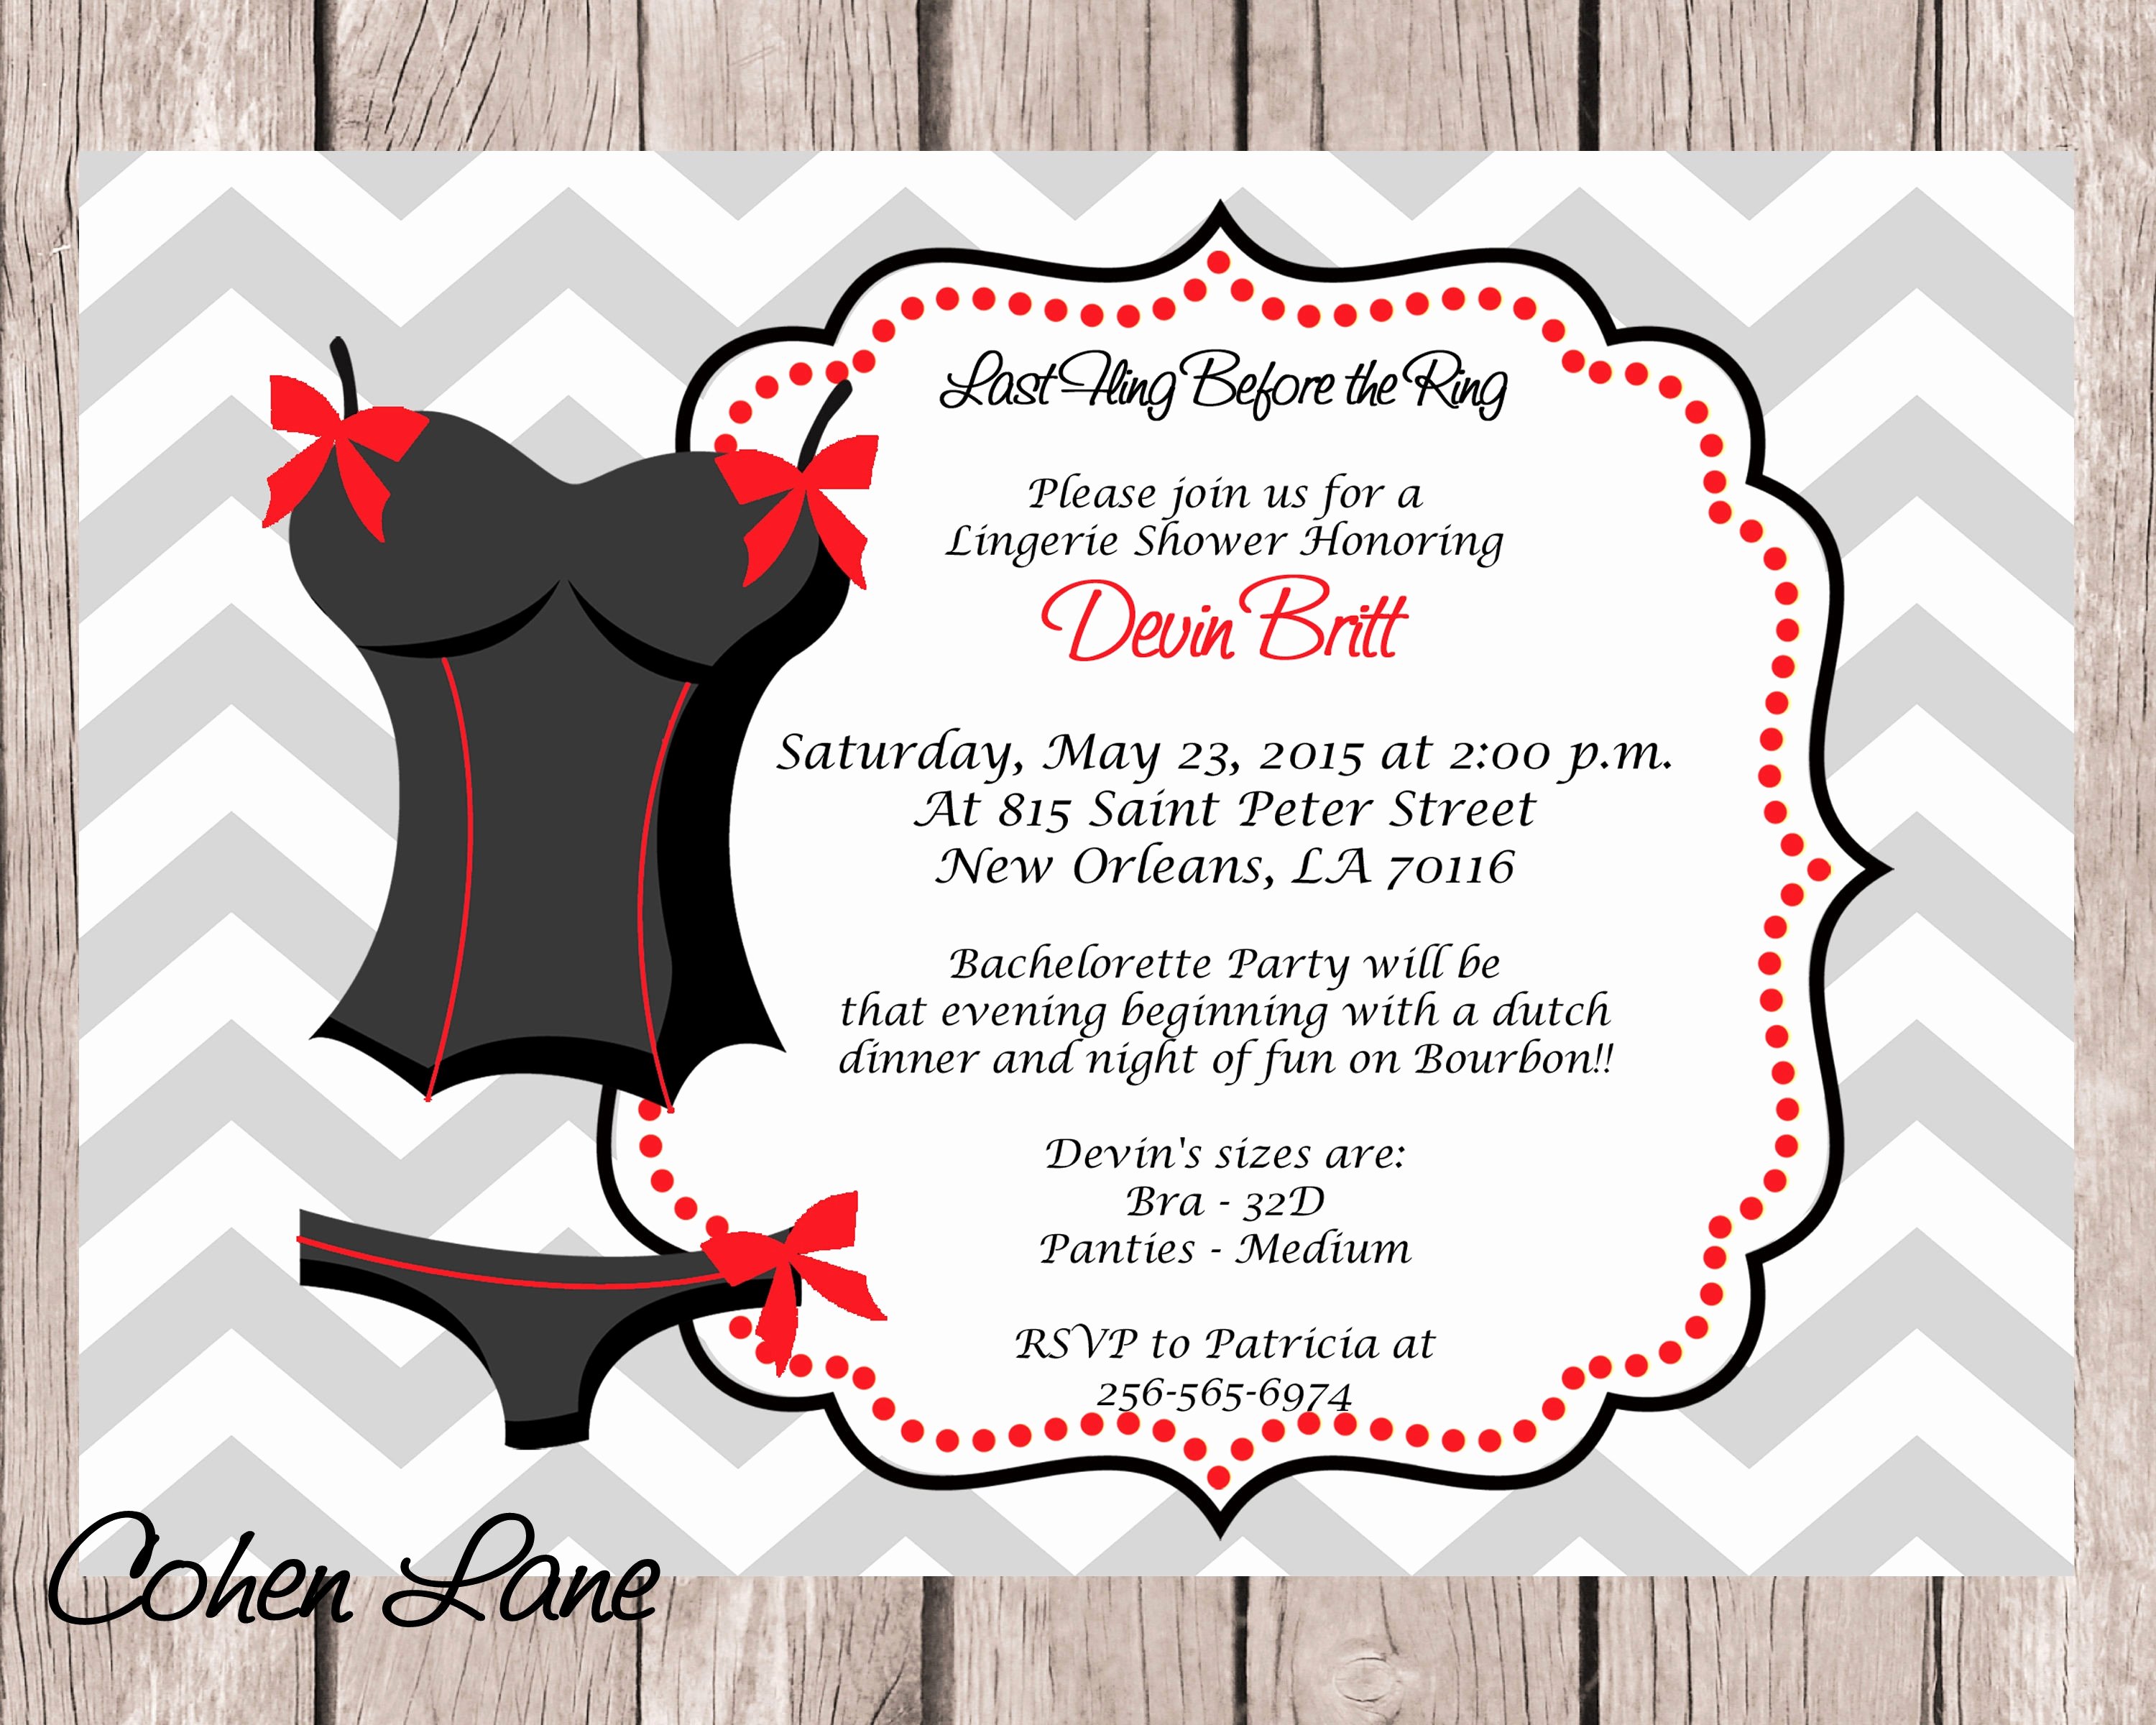 Outlook Email Invitation Template Inspirational Christmas Party Invitation Template Outlook List Ugly